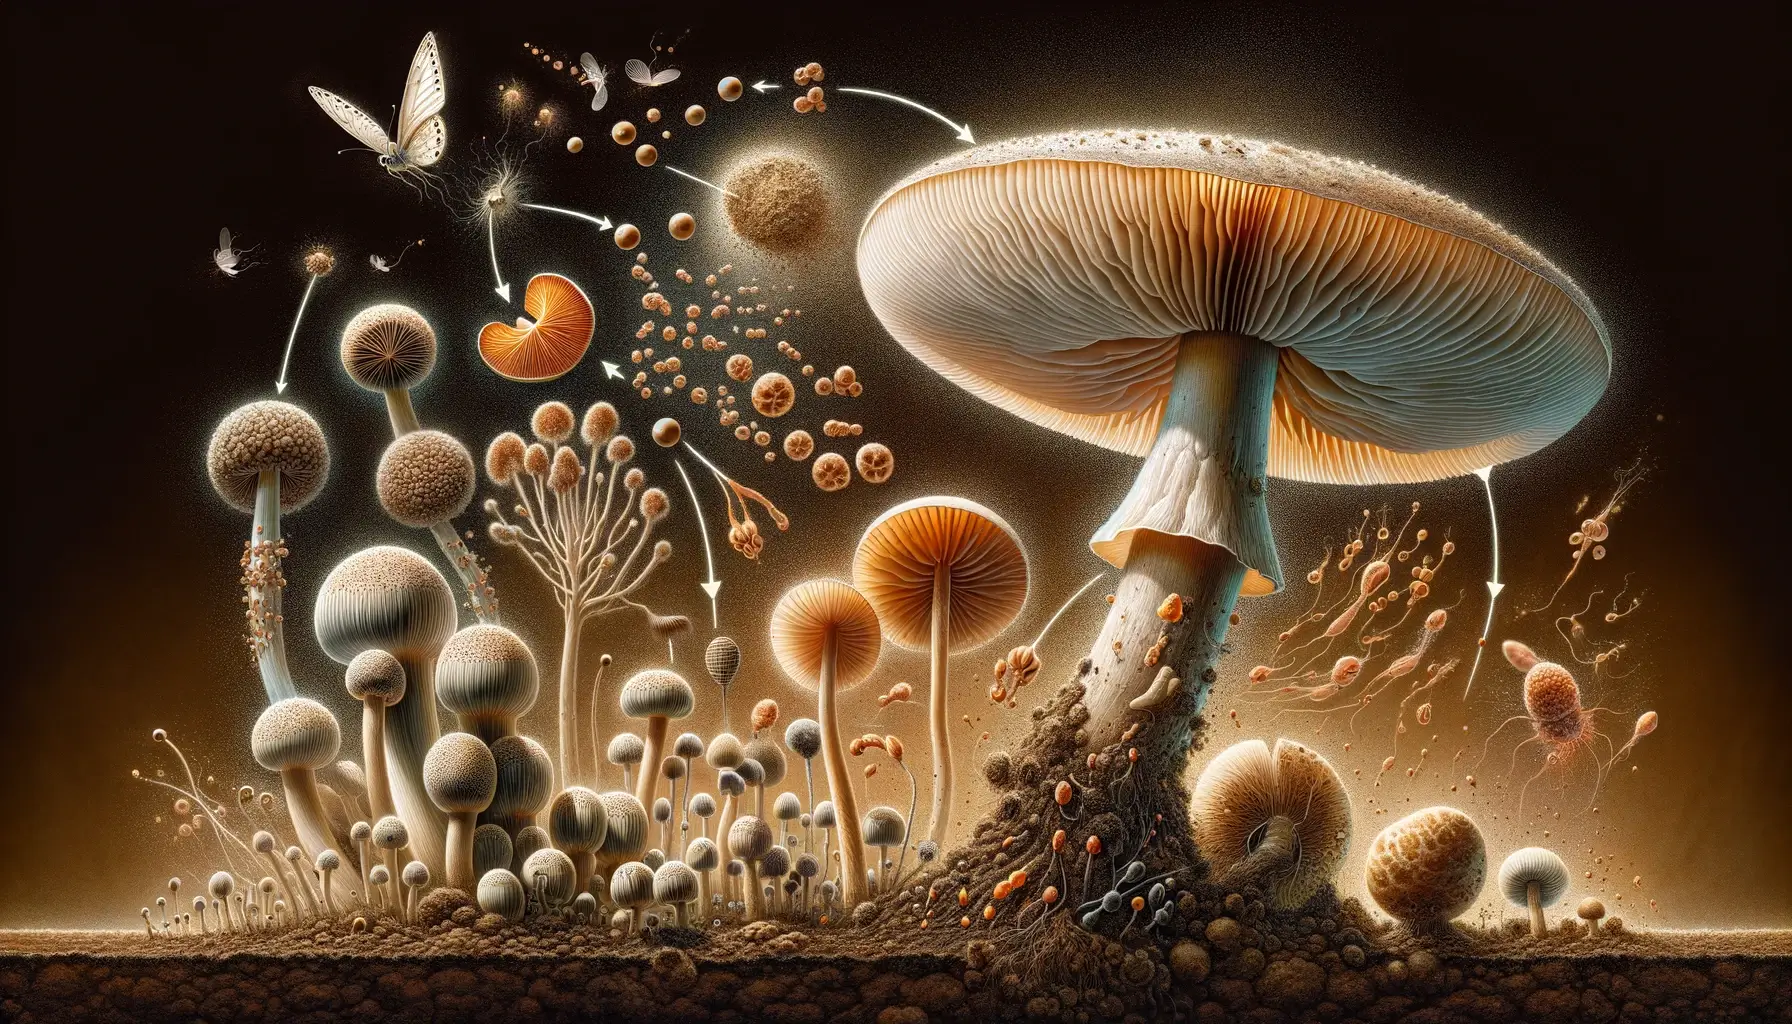 A detailed and informative illustration showcasing the lifecycle of mushrooms and how their spores work, perfect for a feature image on 'How do mushroom spores work?'. The image visualizes mushrooms in various stages of growth, from spore dispersal to the development of mycelium and the eventual emergence of fruiting bodies. Highlighted are the tiny, almost invisible spores being released from the gills underneath a mushroom cap, carried away by the wind. The background is filled with a rich, dark soil, emphasizing the natural habitat where mushrooms thrive. This illustration combines both scientific accuracy and artistic representation to explain the complex process in an engaging way.